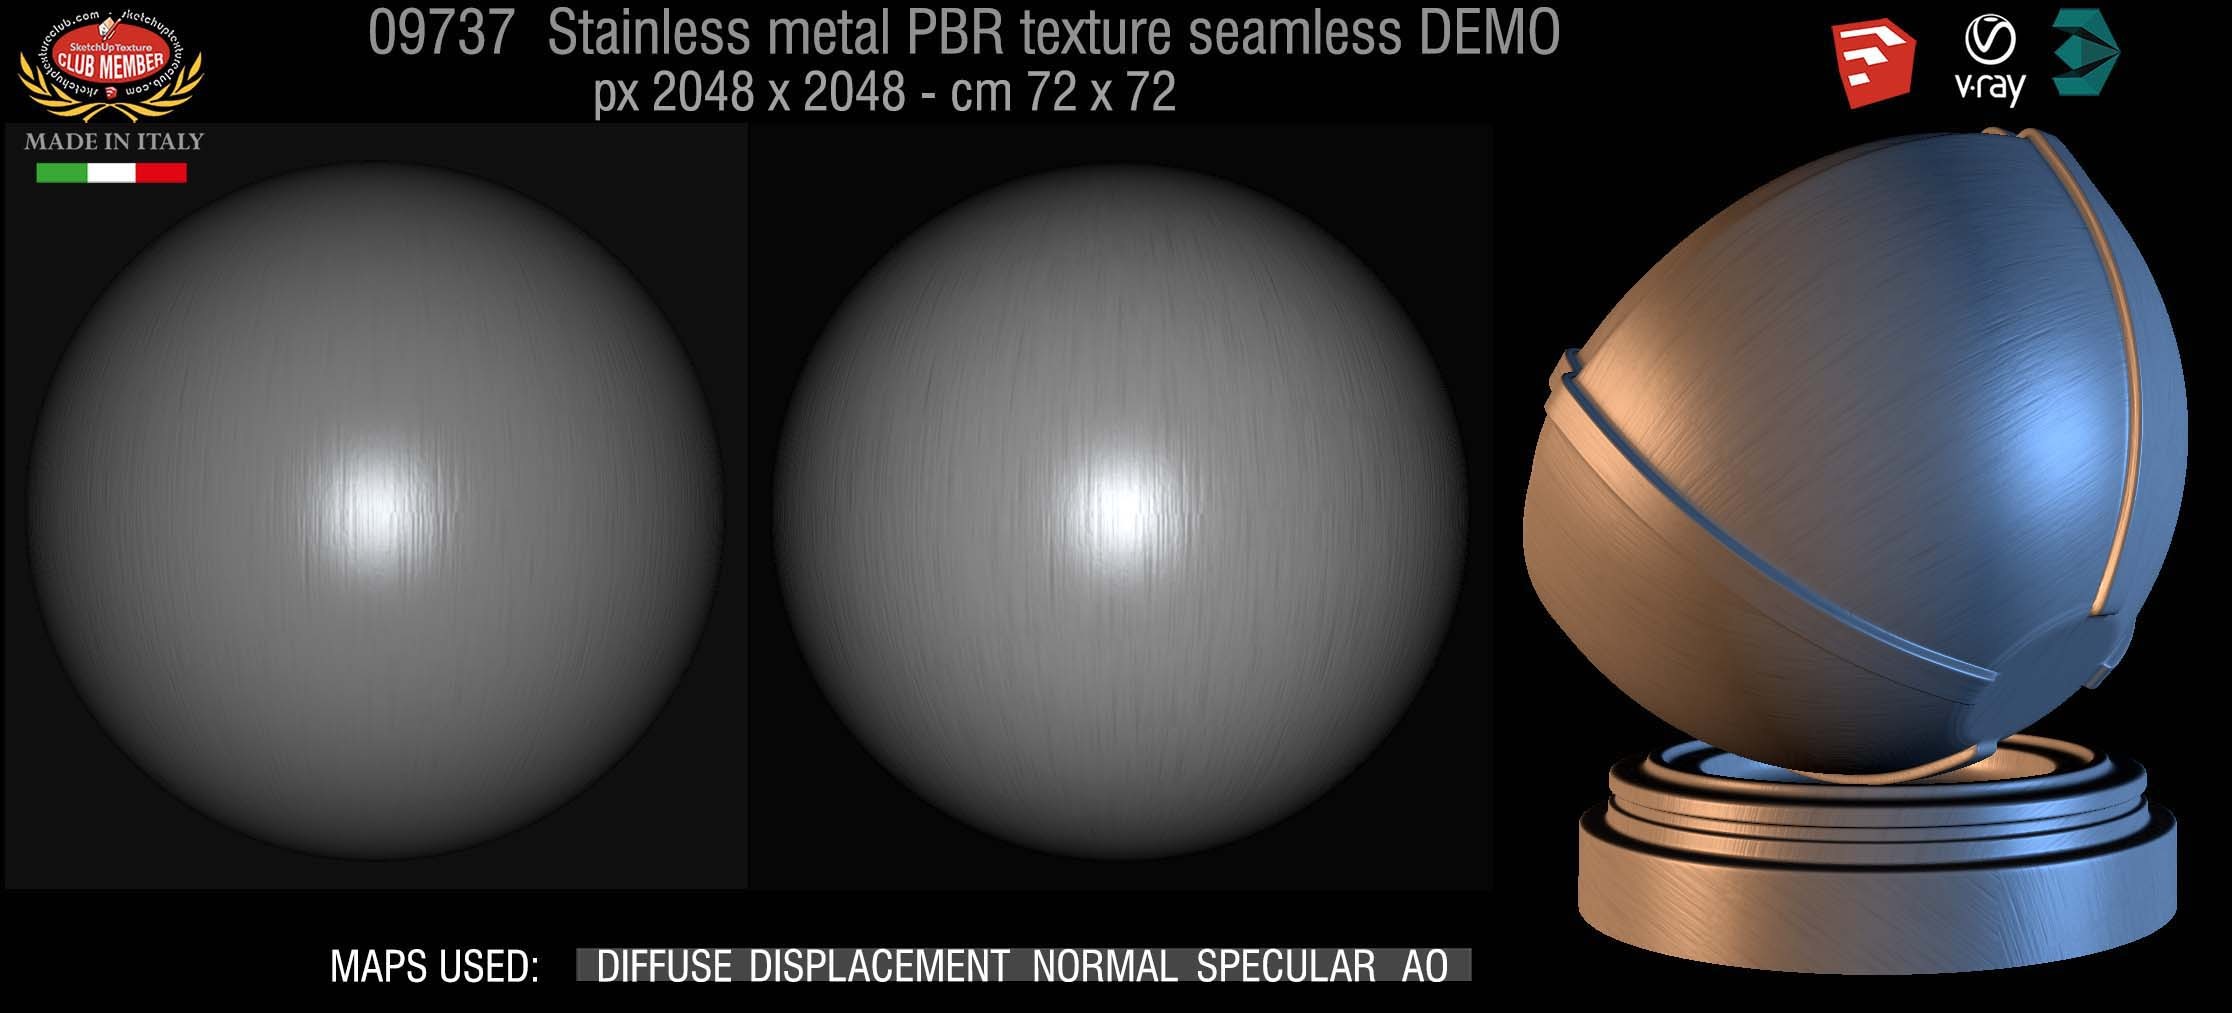 09737 Stainless bright satin PBR texture seamless DEMO